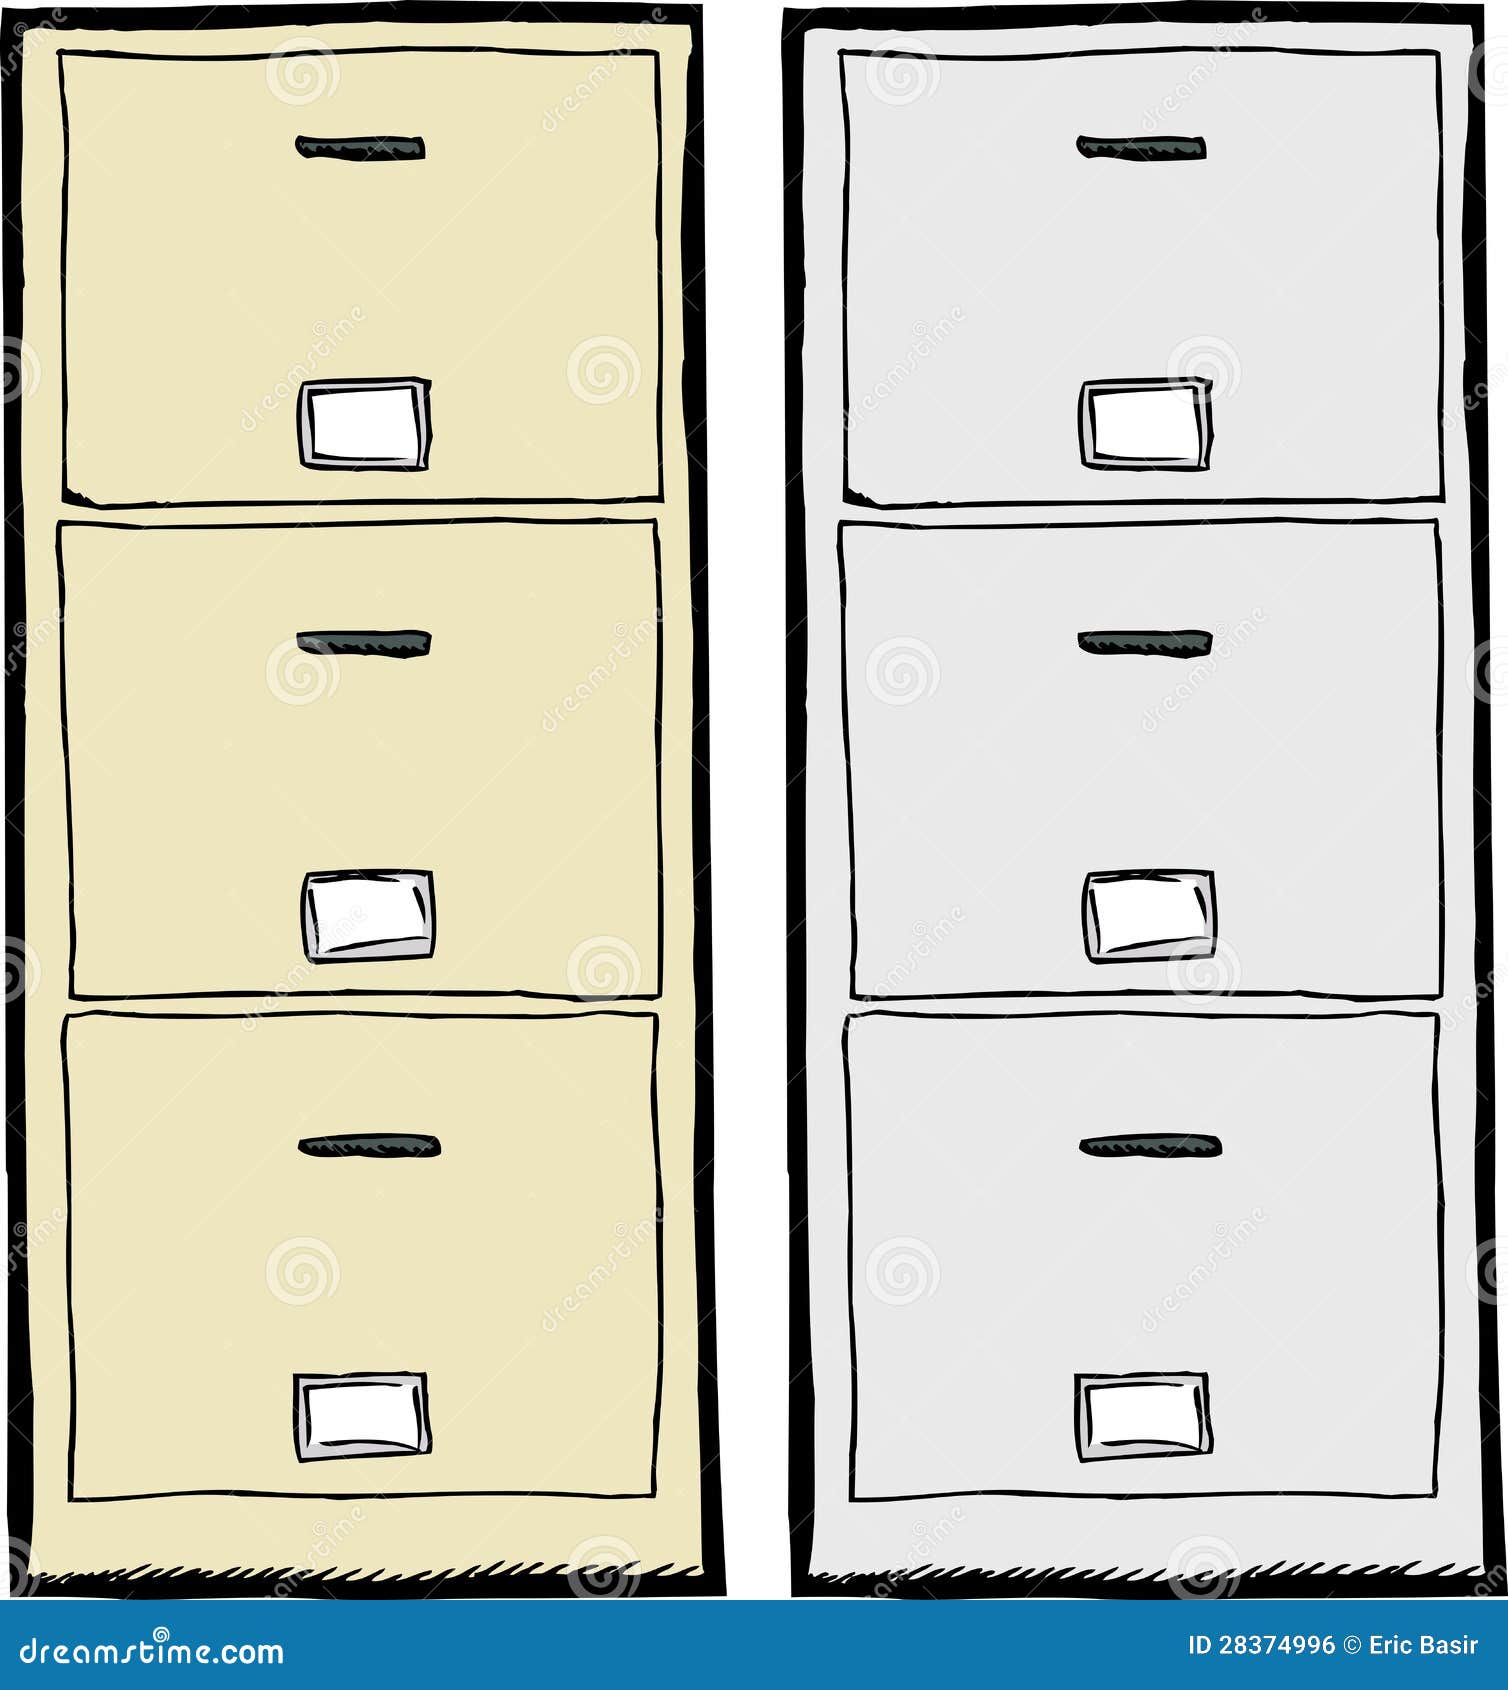 Front view of isolated metal filing cabinets.